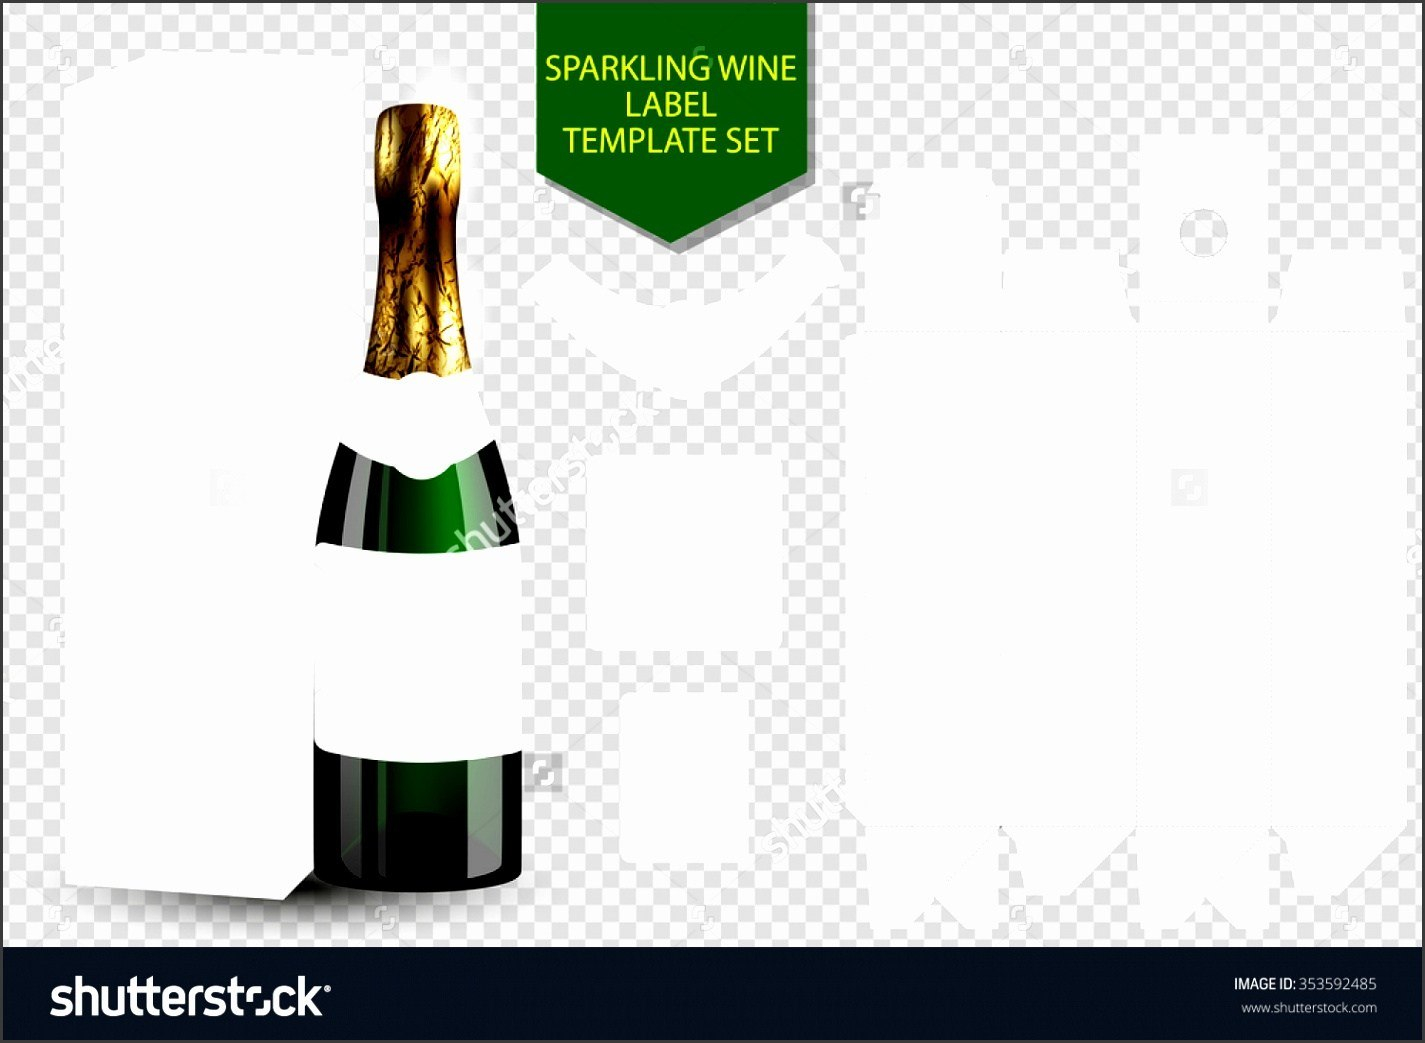 Template Ideas Microsoft Word Wine Label Sanhf Unique Bottle pertaining to Wine Label Template Word